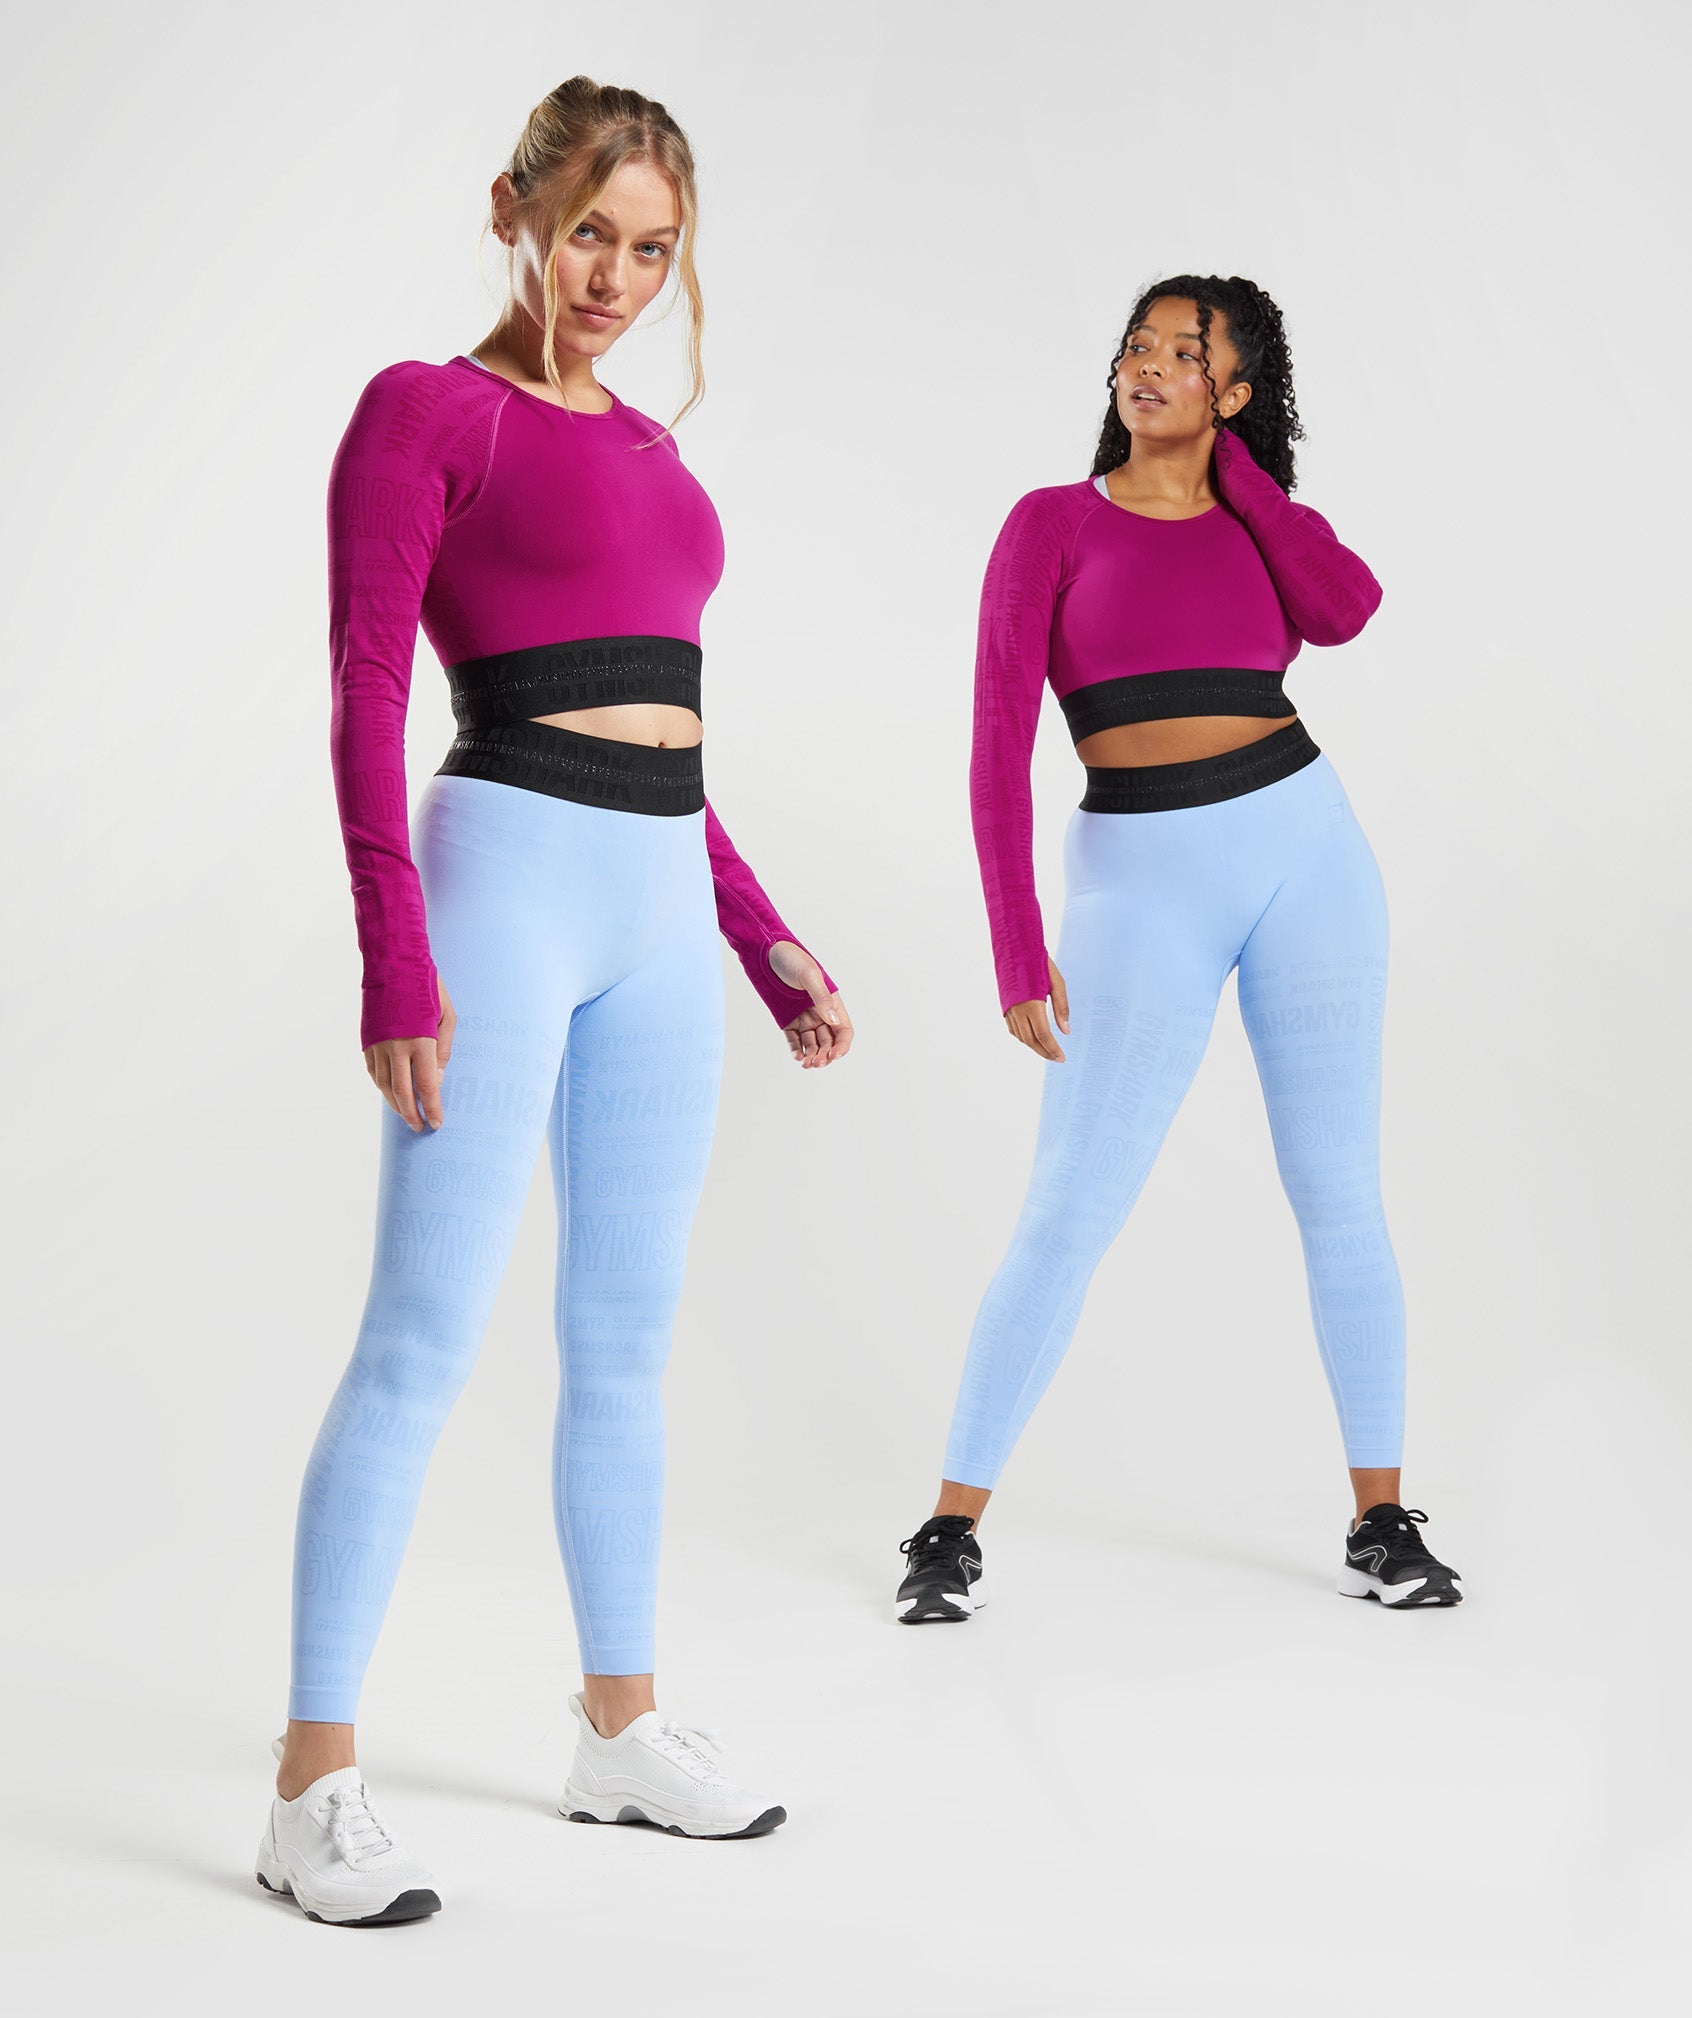 Products - Tagged Brand GymShark - Page 4